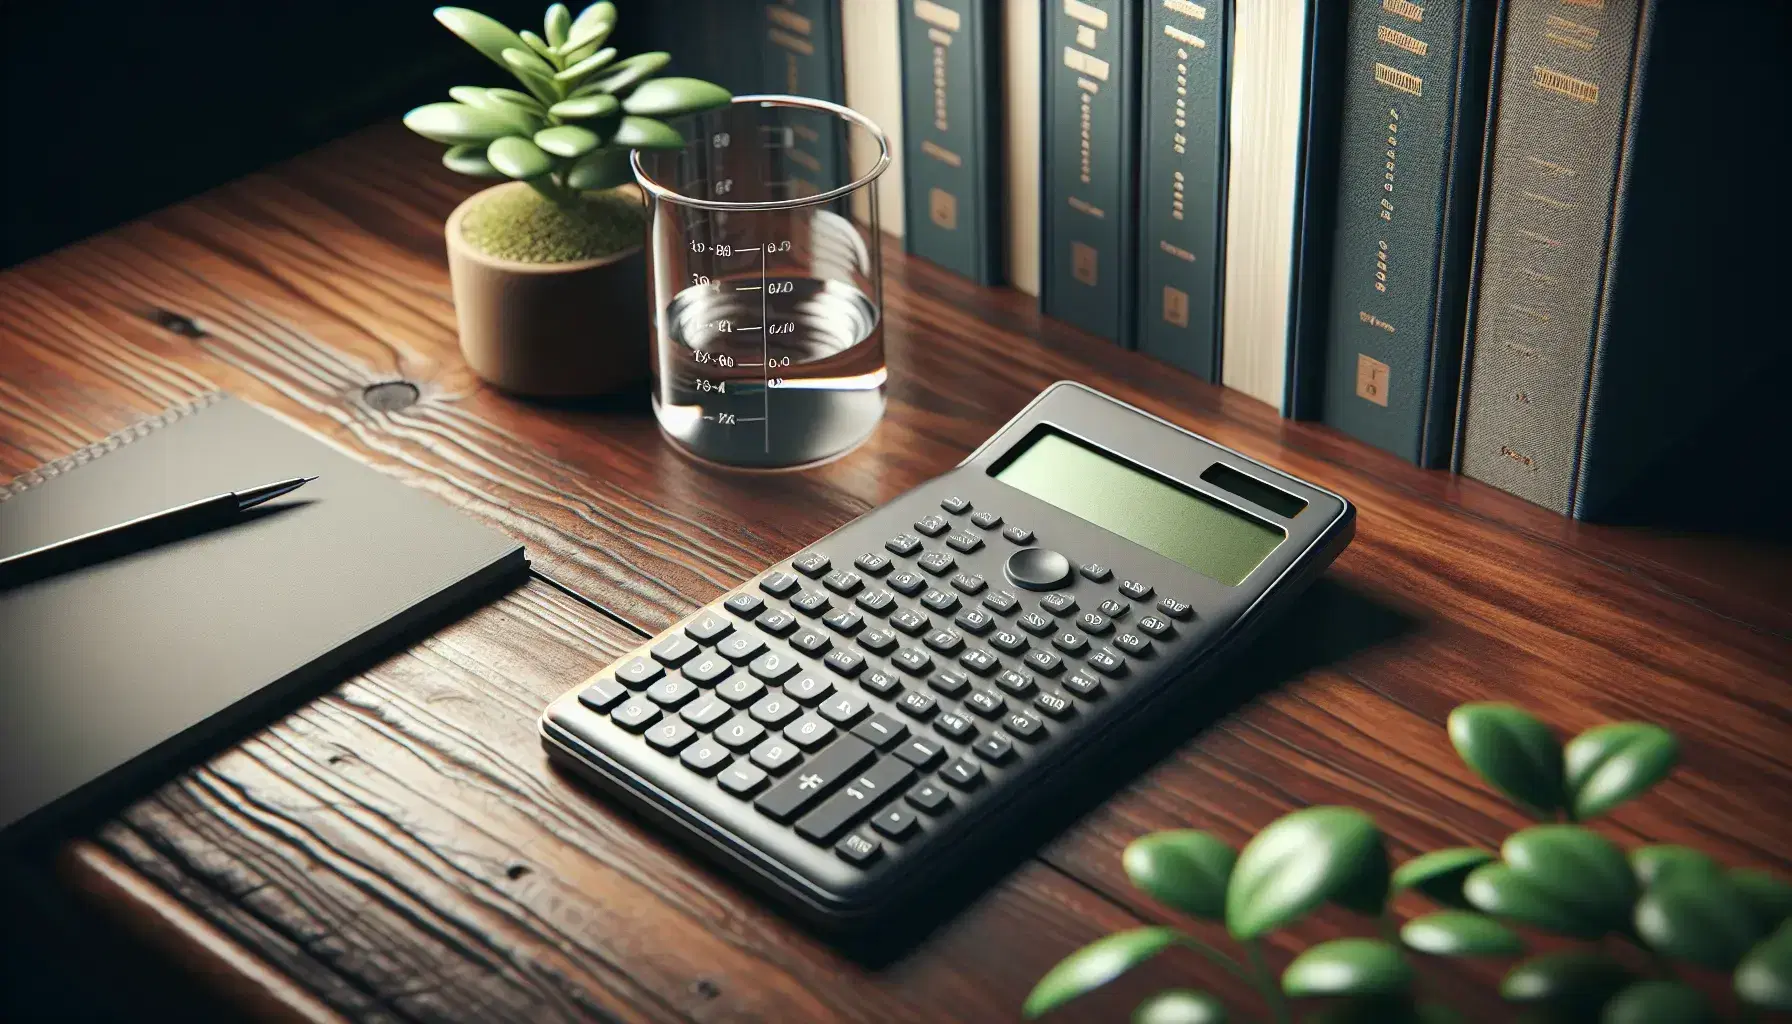 Scientific calculator with cover on wooden desk, flanked by a green potted plant and a half-filled glass beaker, with blurred textbooks in the background.